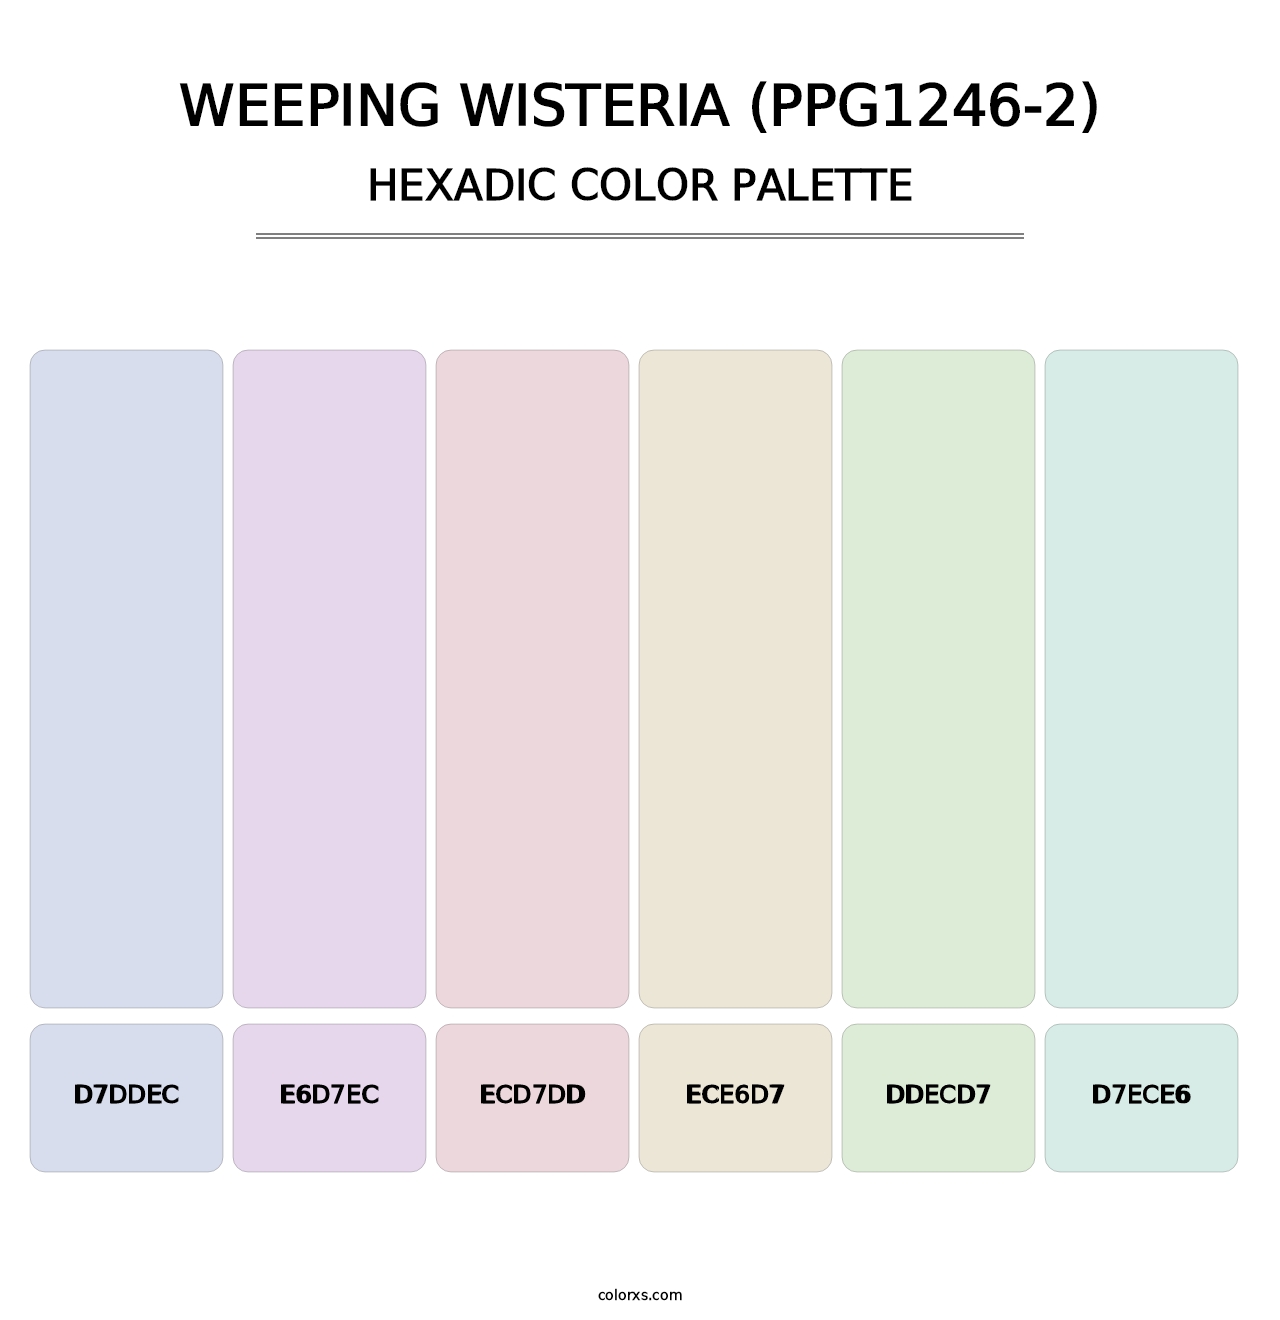 Weeping Wisteria (PPG1246-2) - Hexadic Color Palette